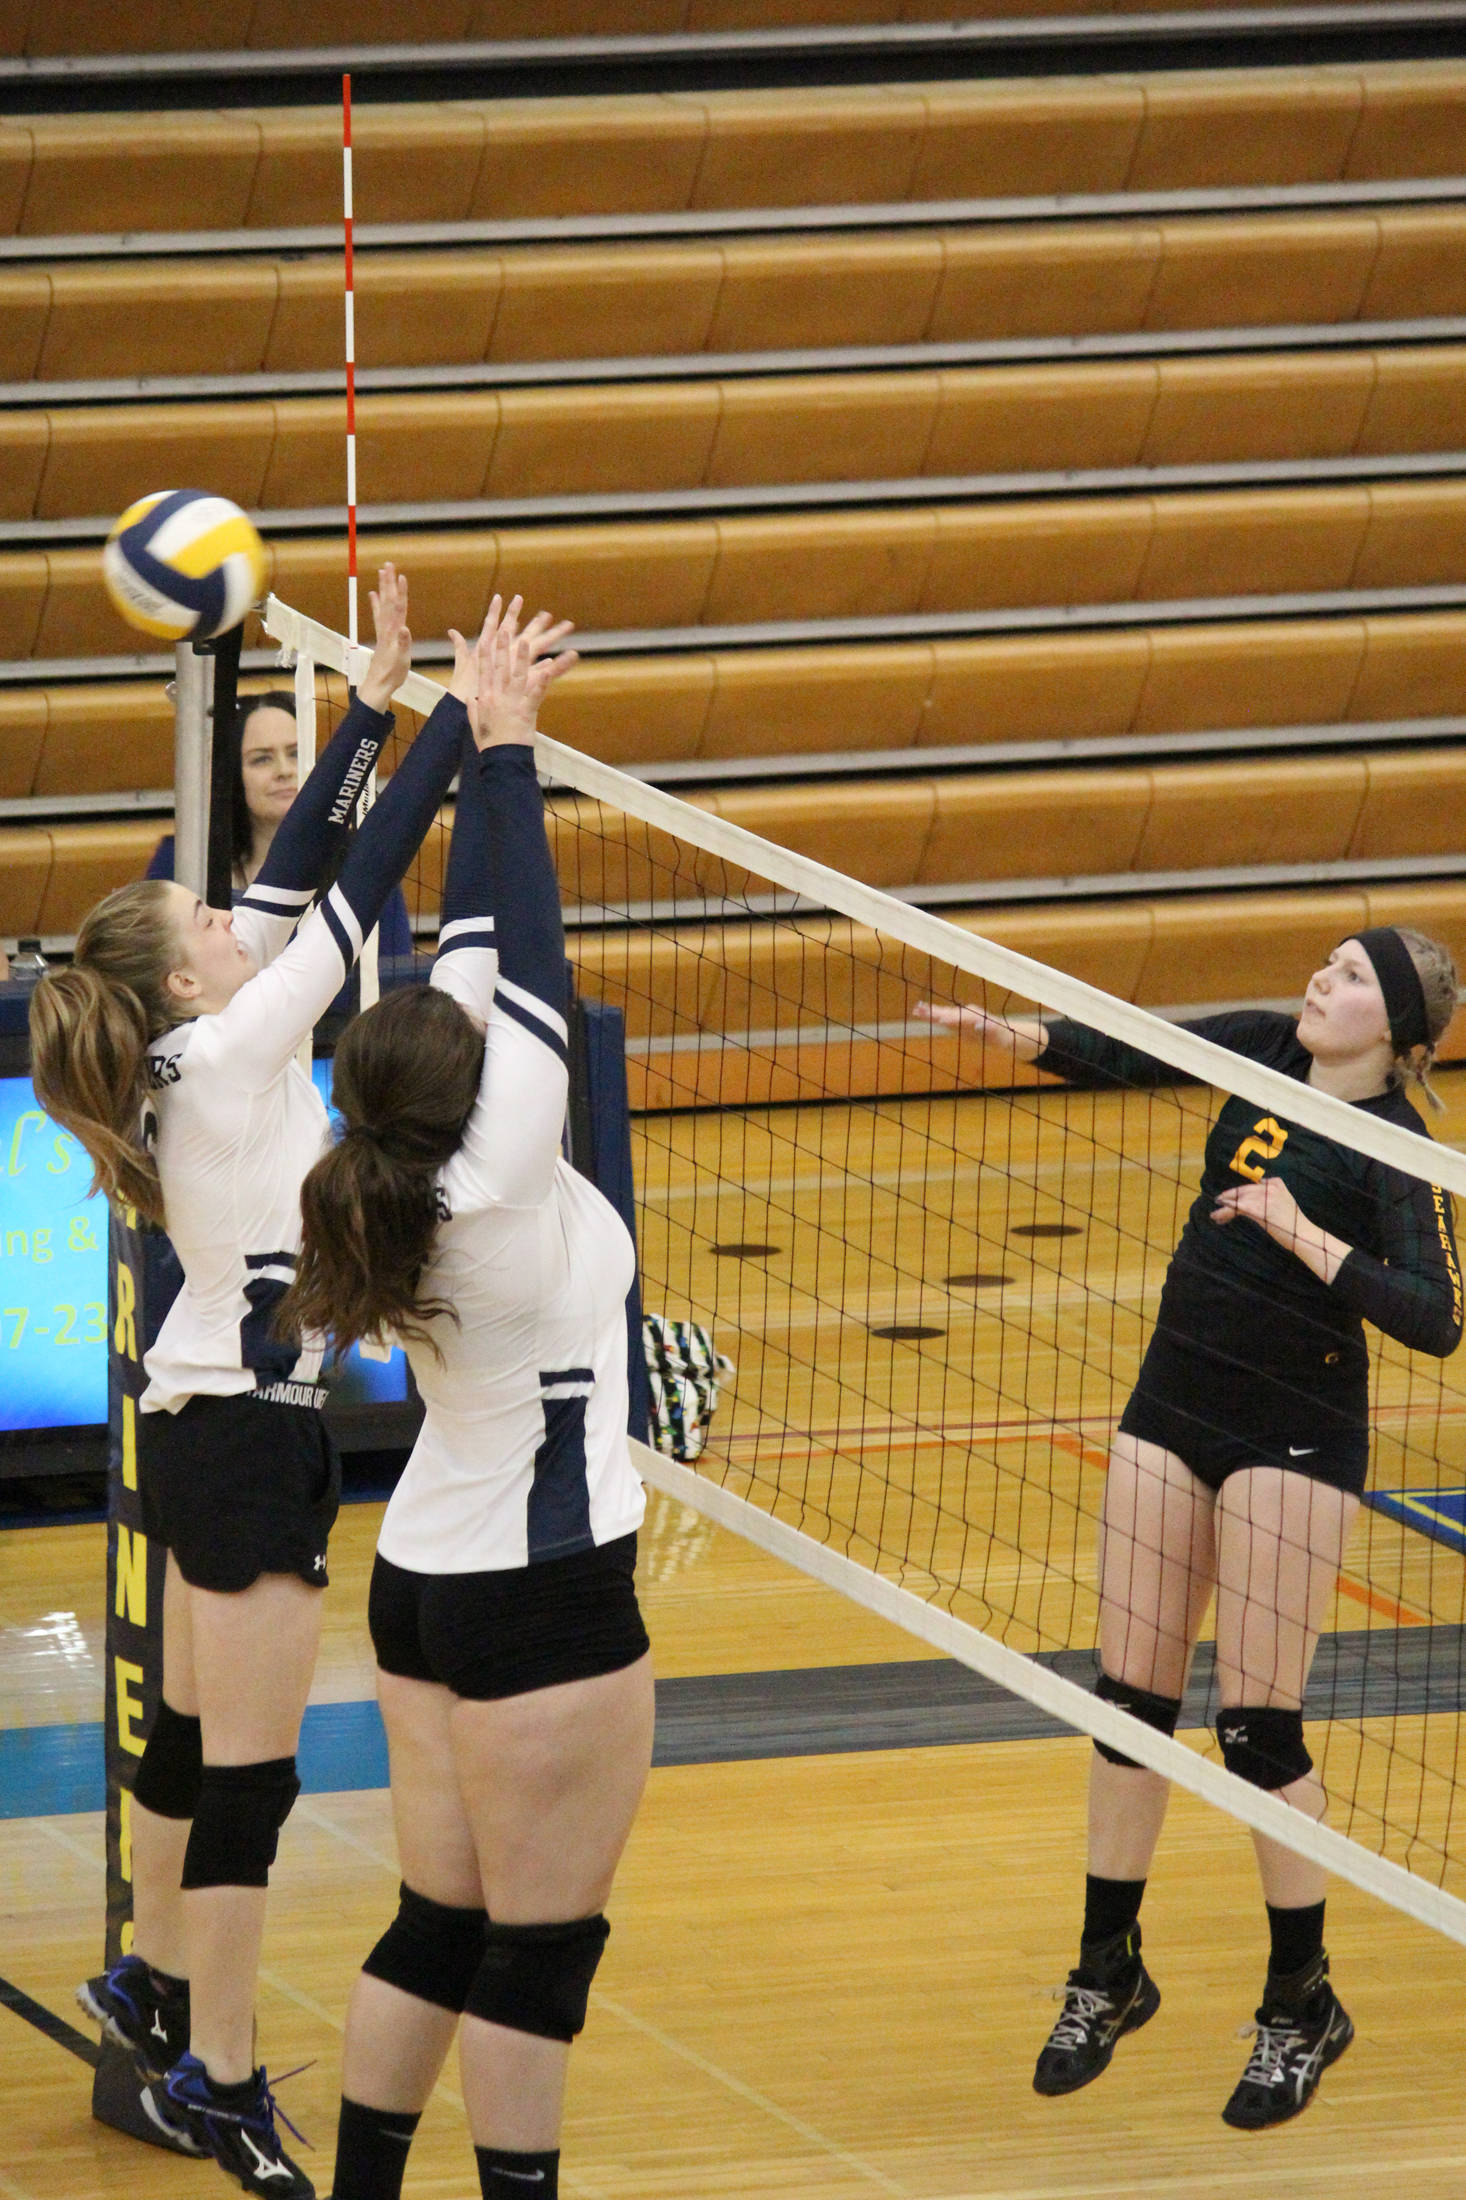 Homer’s Karmyn Gallios (left) and Brianna Hetrick (right) jump to block a hit from Seward’s Katelyn Sawyer-Lemme during a game Saturday, Sept. 22, 2018 in the Alice Witte Gymnasium in Homer, Alaska. (Photo by Megan Pacer/Homer News)